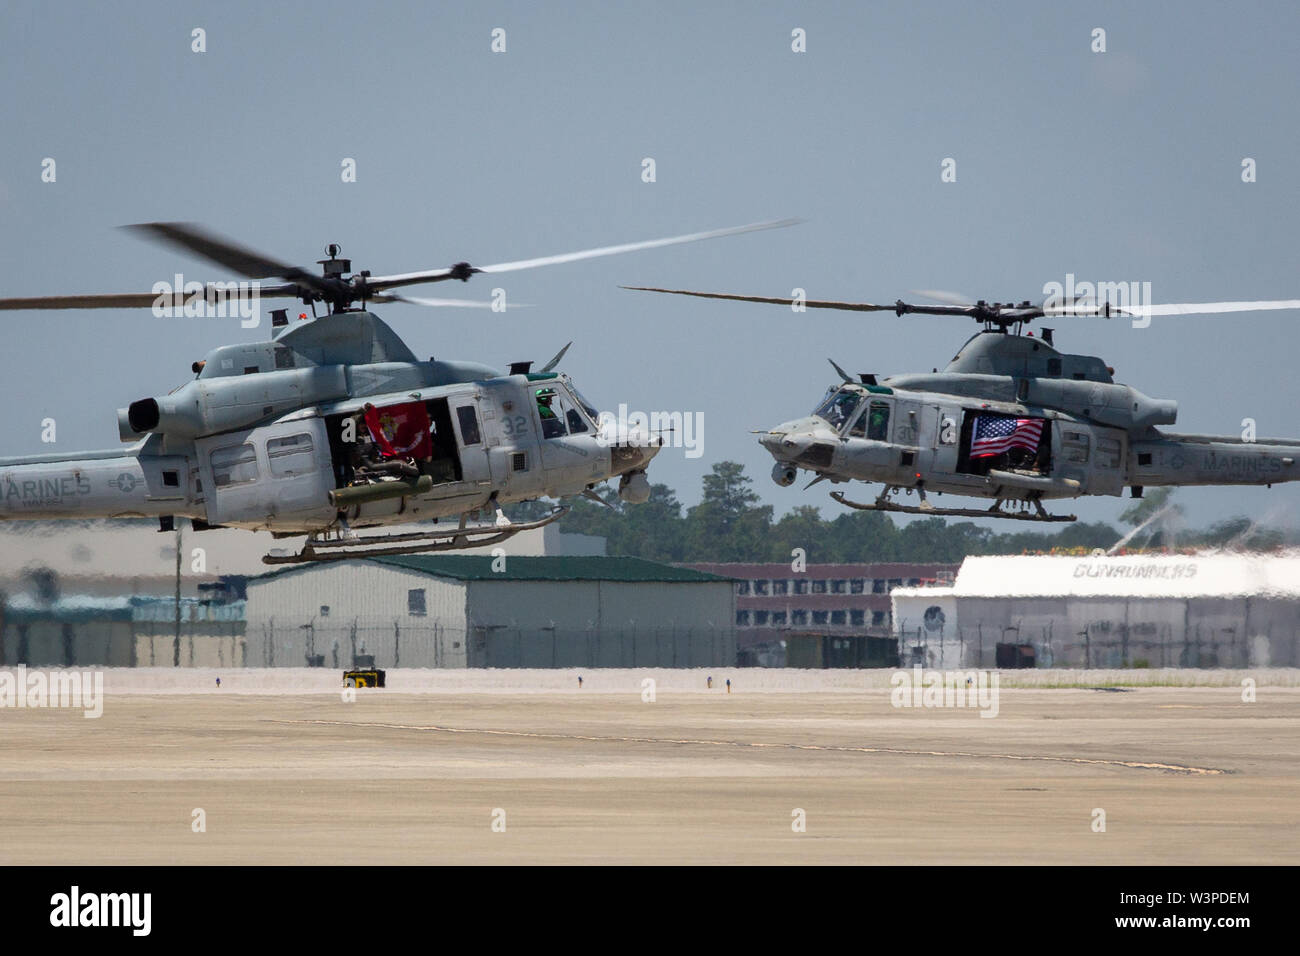 U.S. Marine Corps UH-1Y Hueys assigned to Marine Medium Tiltrotor Squadron (VMM) 264 prepare for landing during a homecoming reception at Marine Corps Air Station New River, North Carolina, July 14, 2019. Marines and Sailors with VMM-264 returned from a deployment with the 22nd Marine Expeditionary Unit. (U.S. Marine Corps photo by Cpl. Cody Rowe) Stock Photo